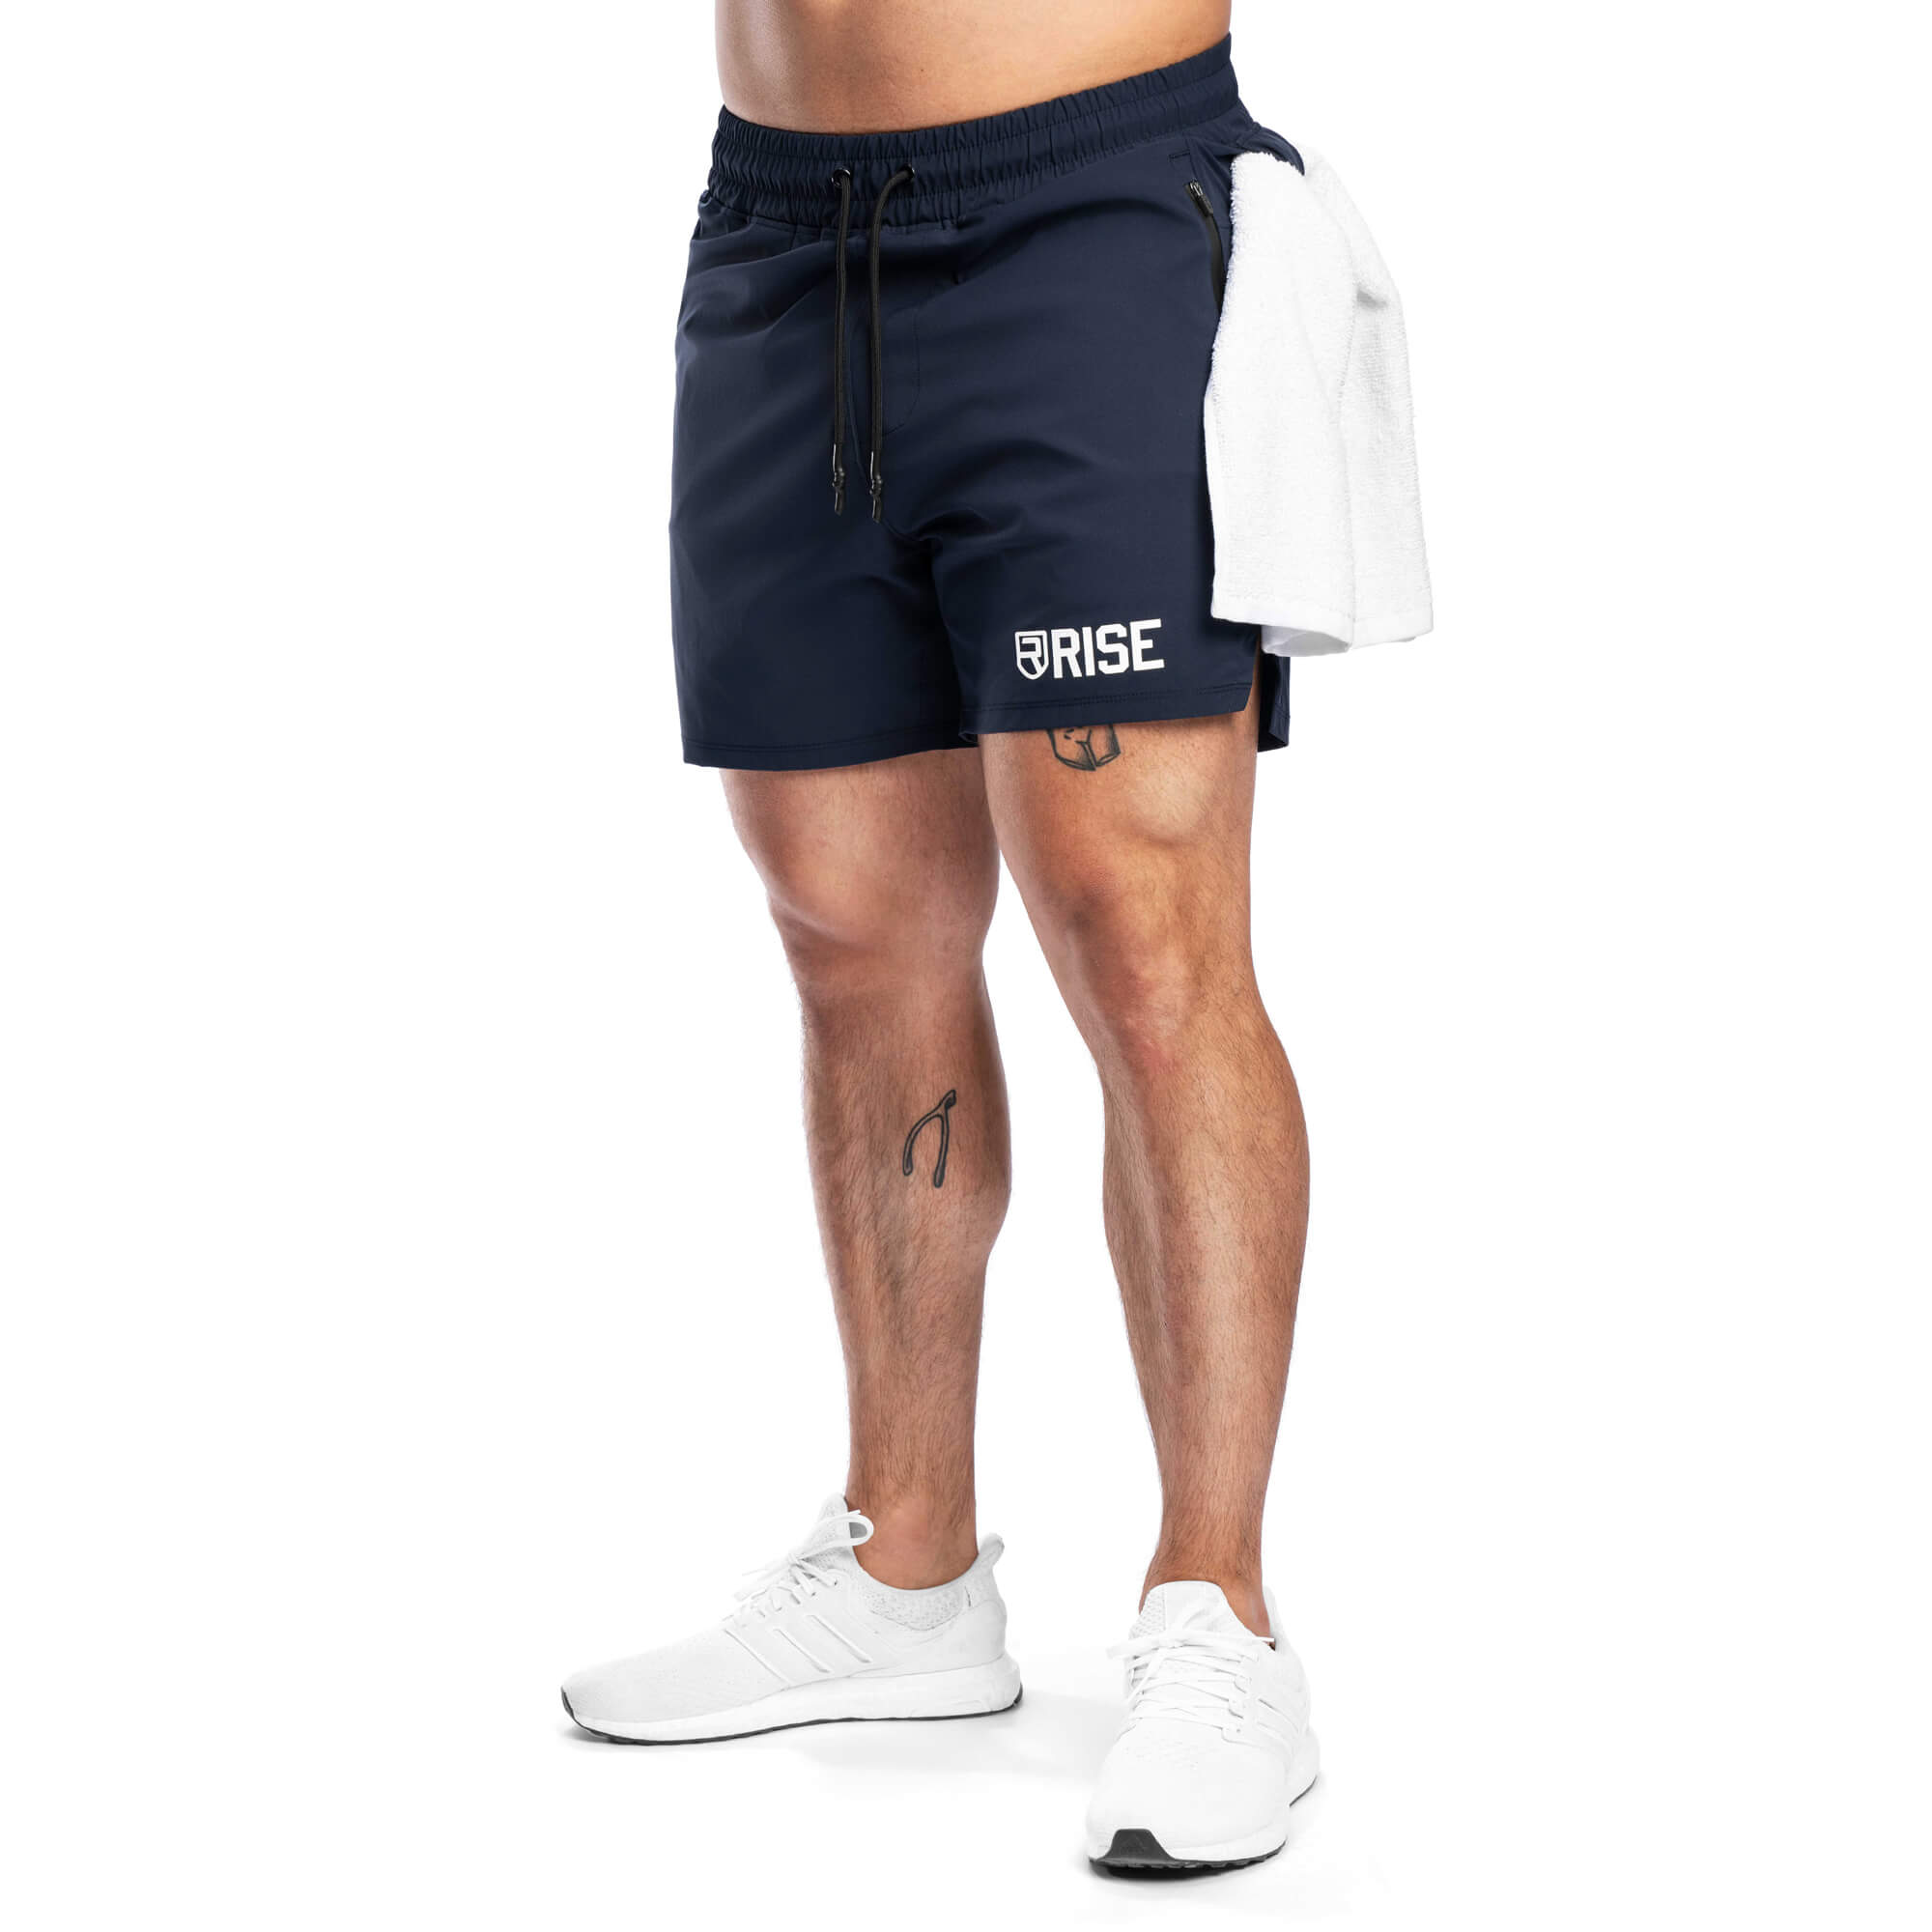 Rest Later Shorts 5" - Navy